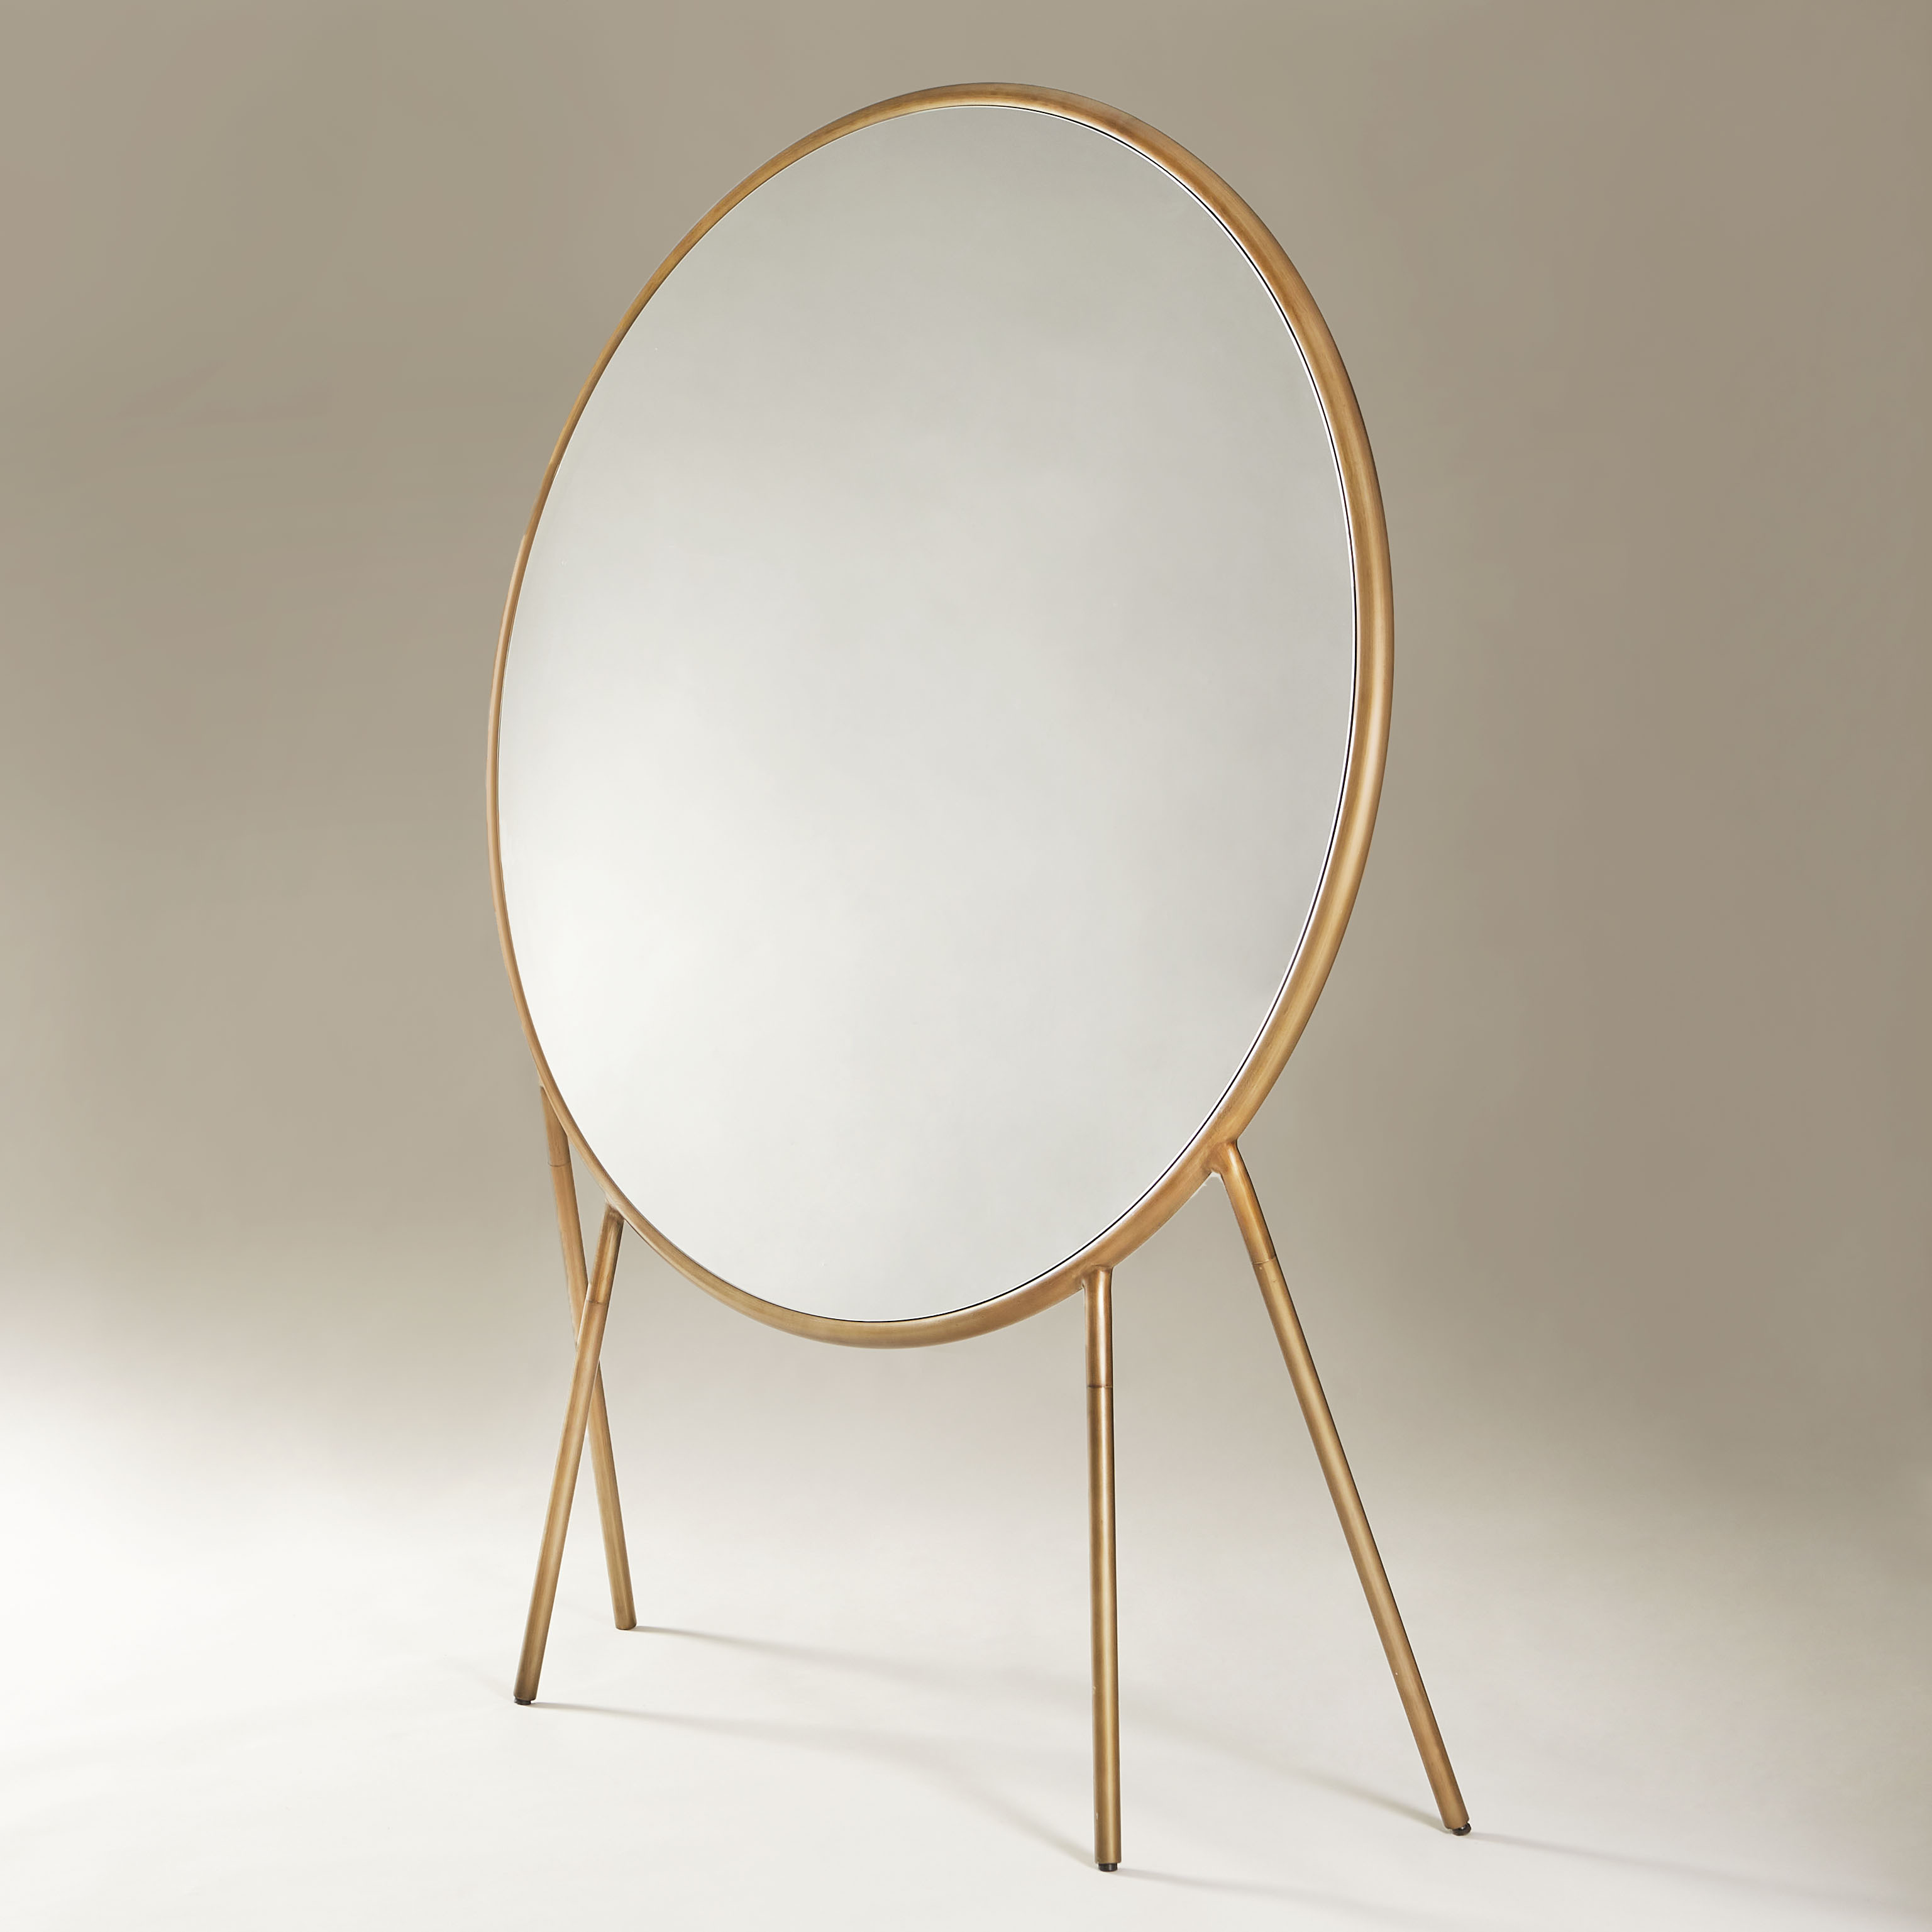 The image for Large Circular Mirror 094 V1